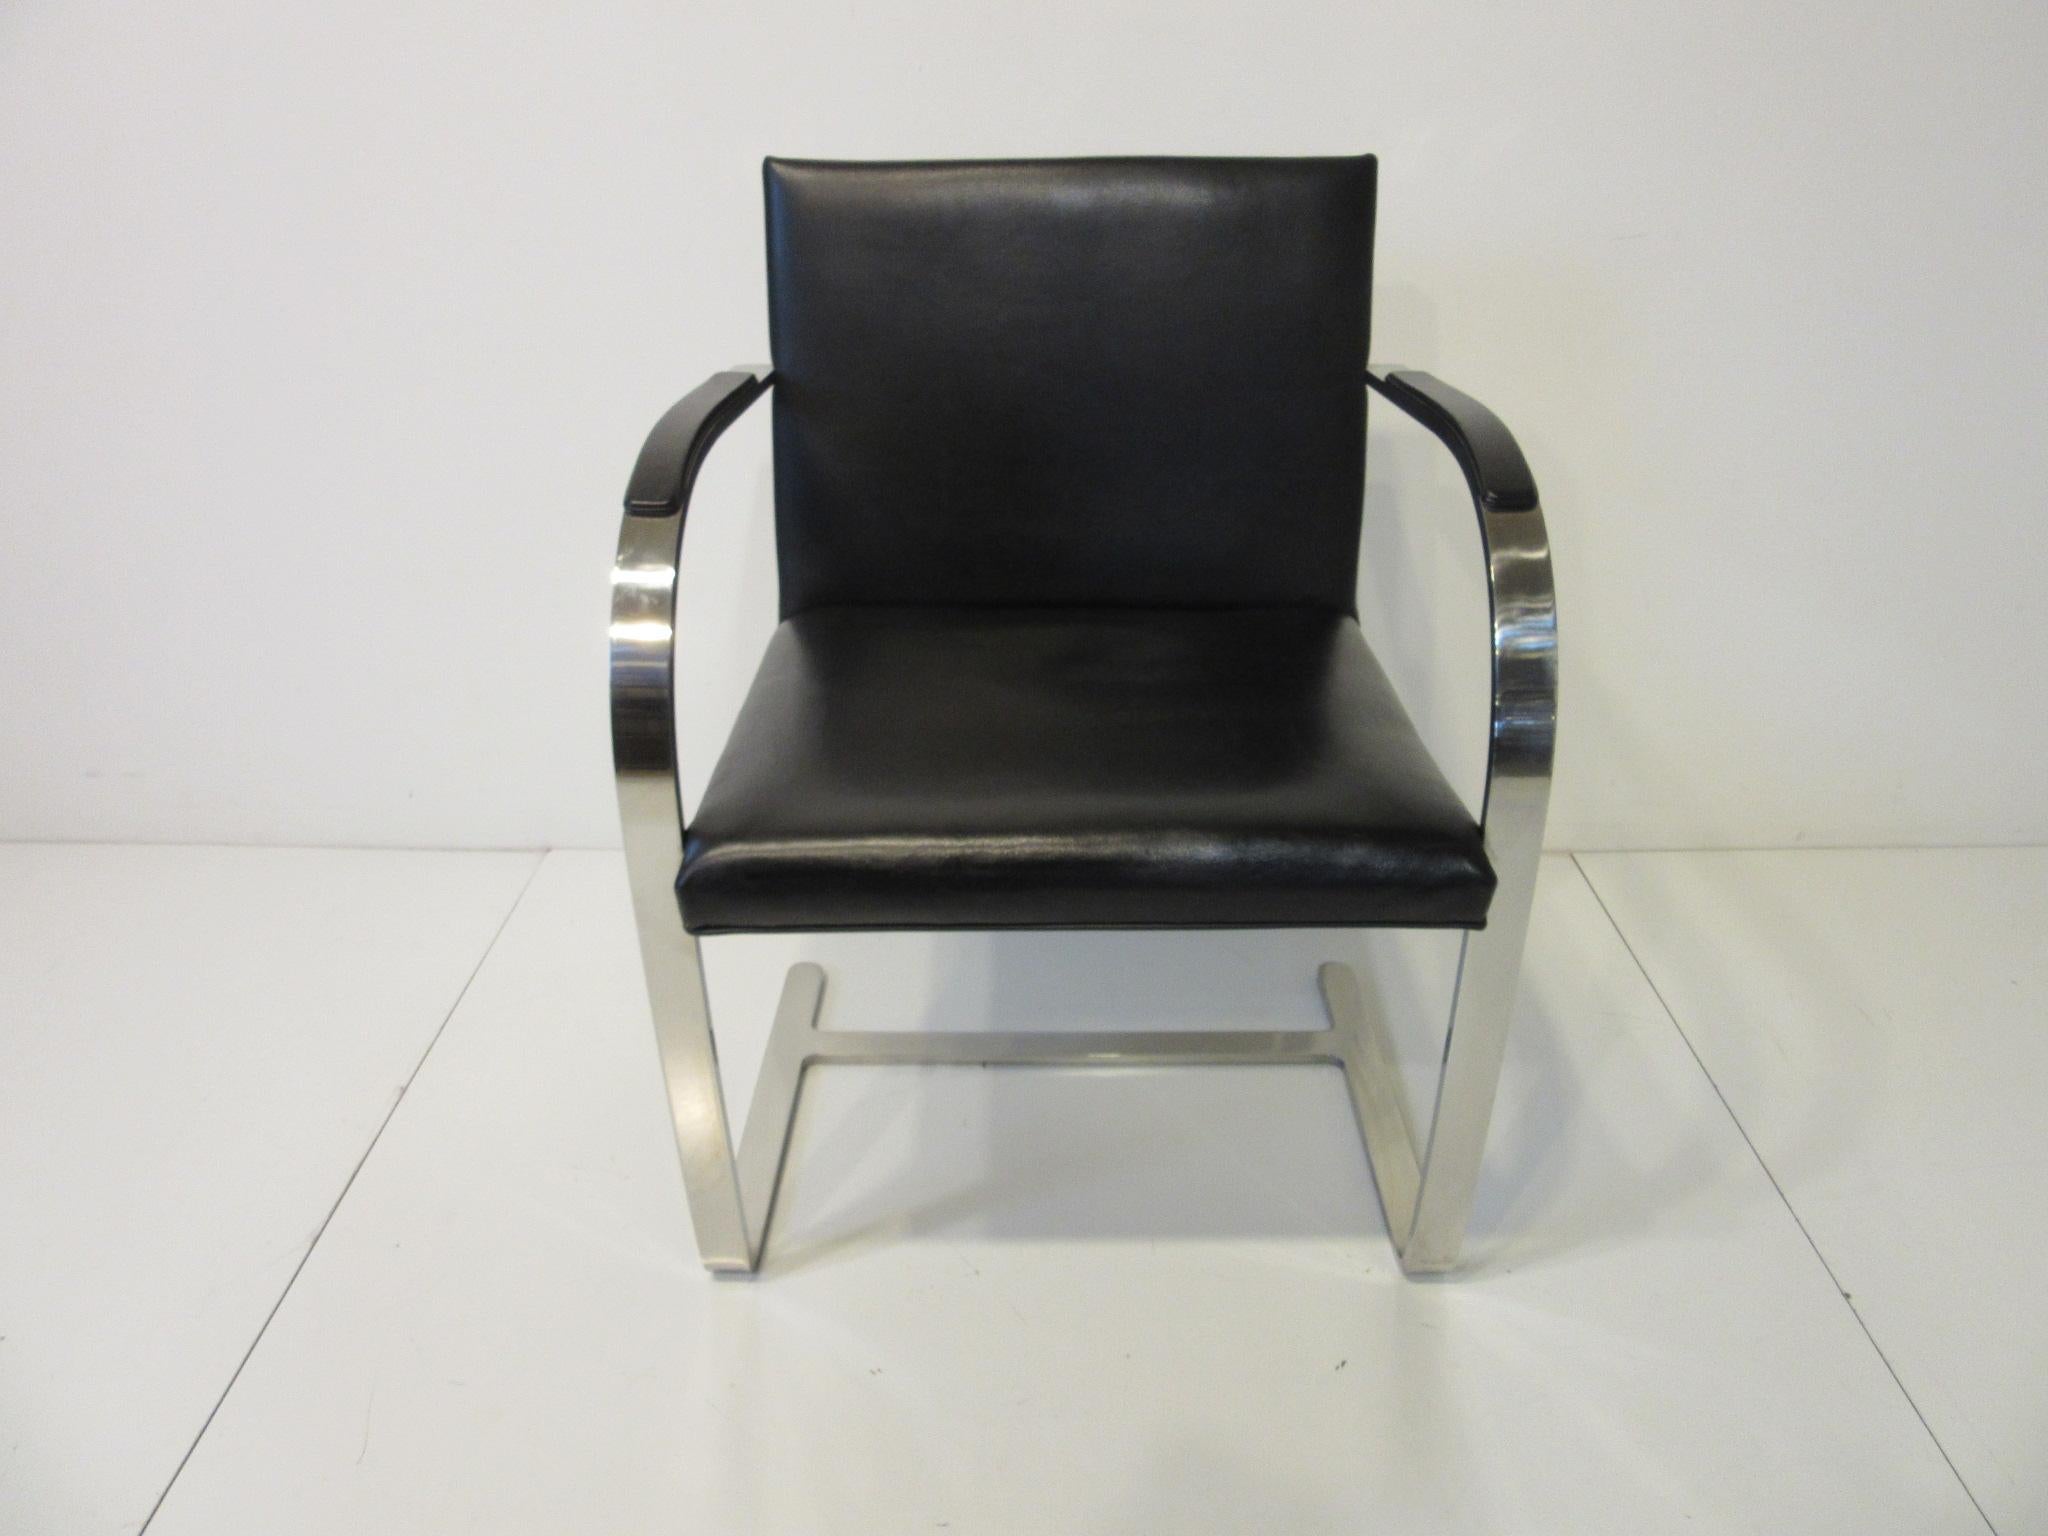 A set of six Brno flat bar armchairs with armpads for dining or conference use in Kenya black spinneybeck leather with bar stock stainless steel frames which are hand ground and have a hand buffed finish from the factory. Designed in the 1930s by